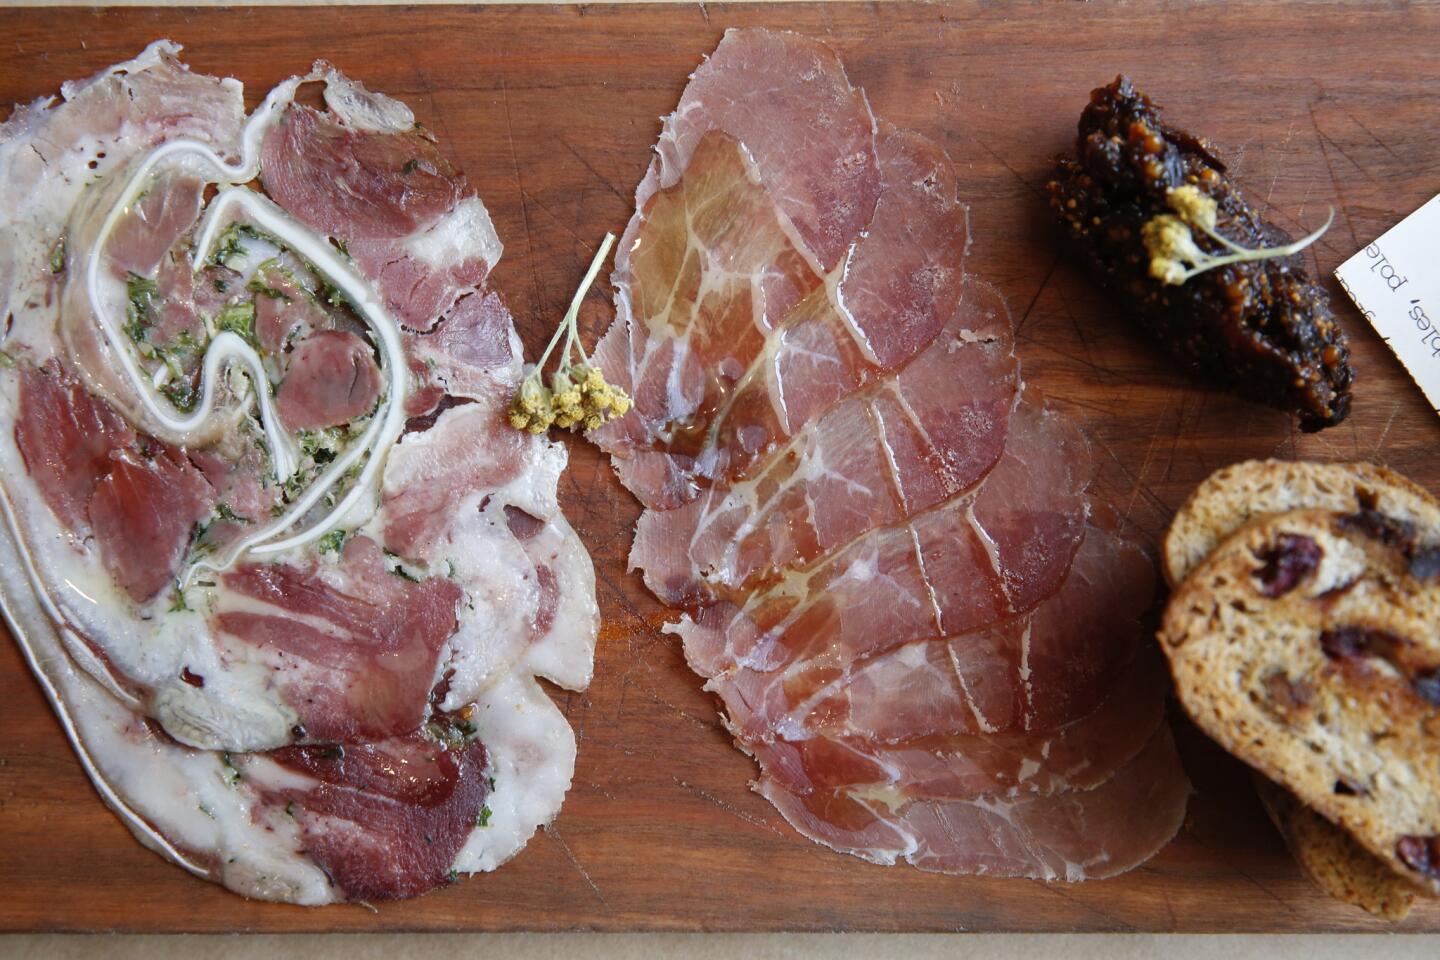 An antipasti, with cured meats, cheese, pickles and mustard. Many of the dishes at Union are served on wood slabs to match the restaurant's simple decor.